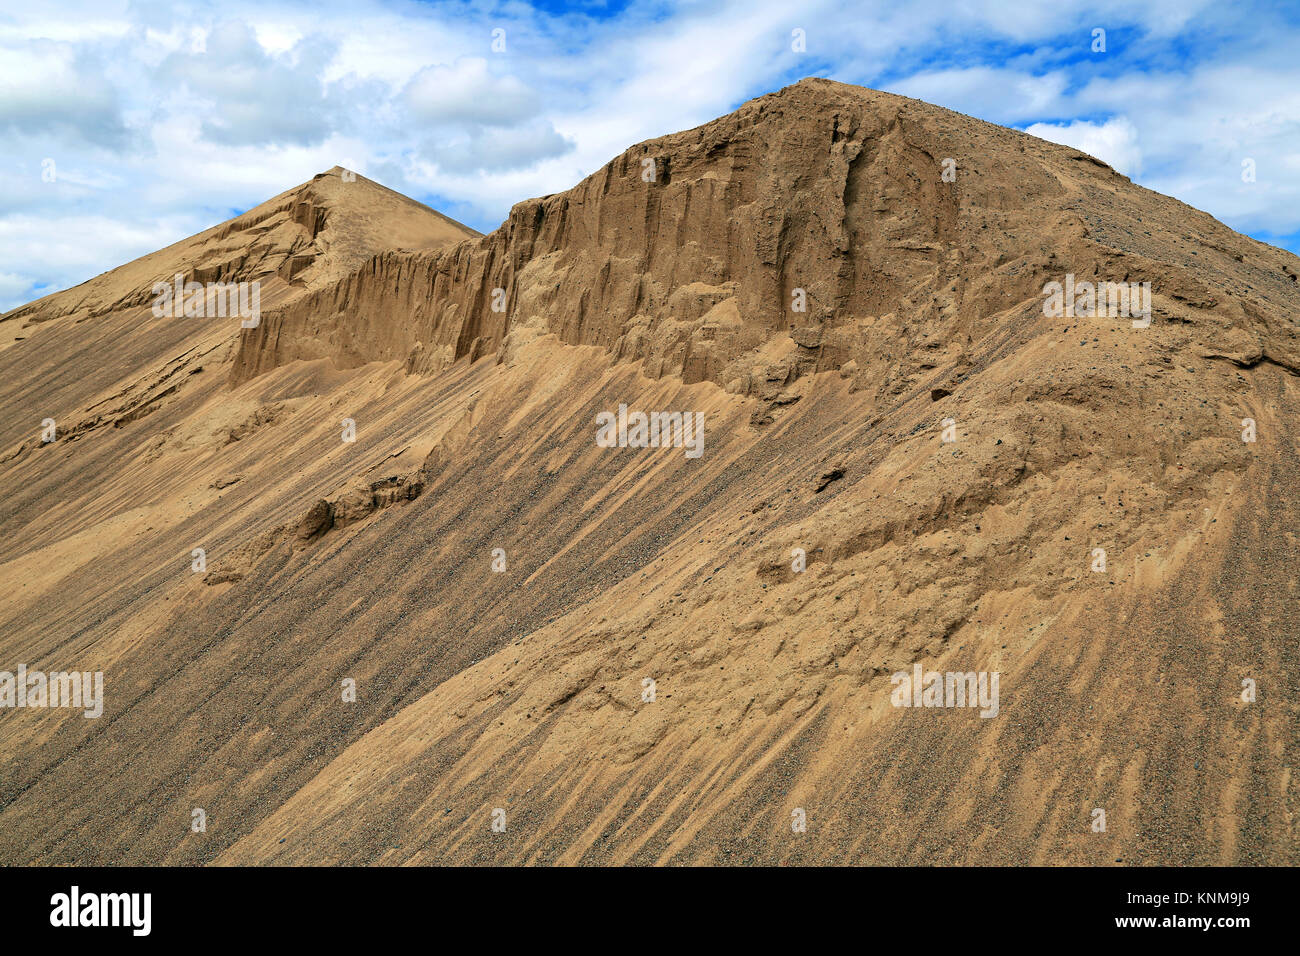 Hills of construction sand against blue sky and few white clouds. Stock Photo